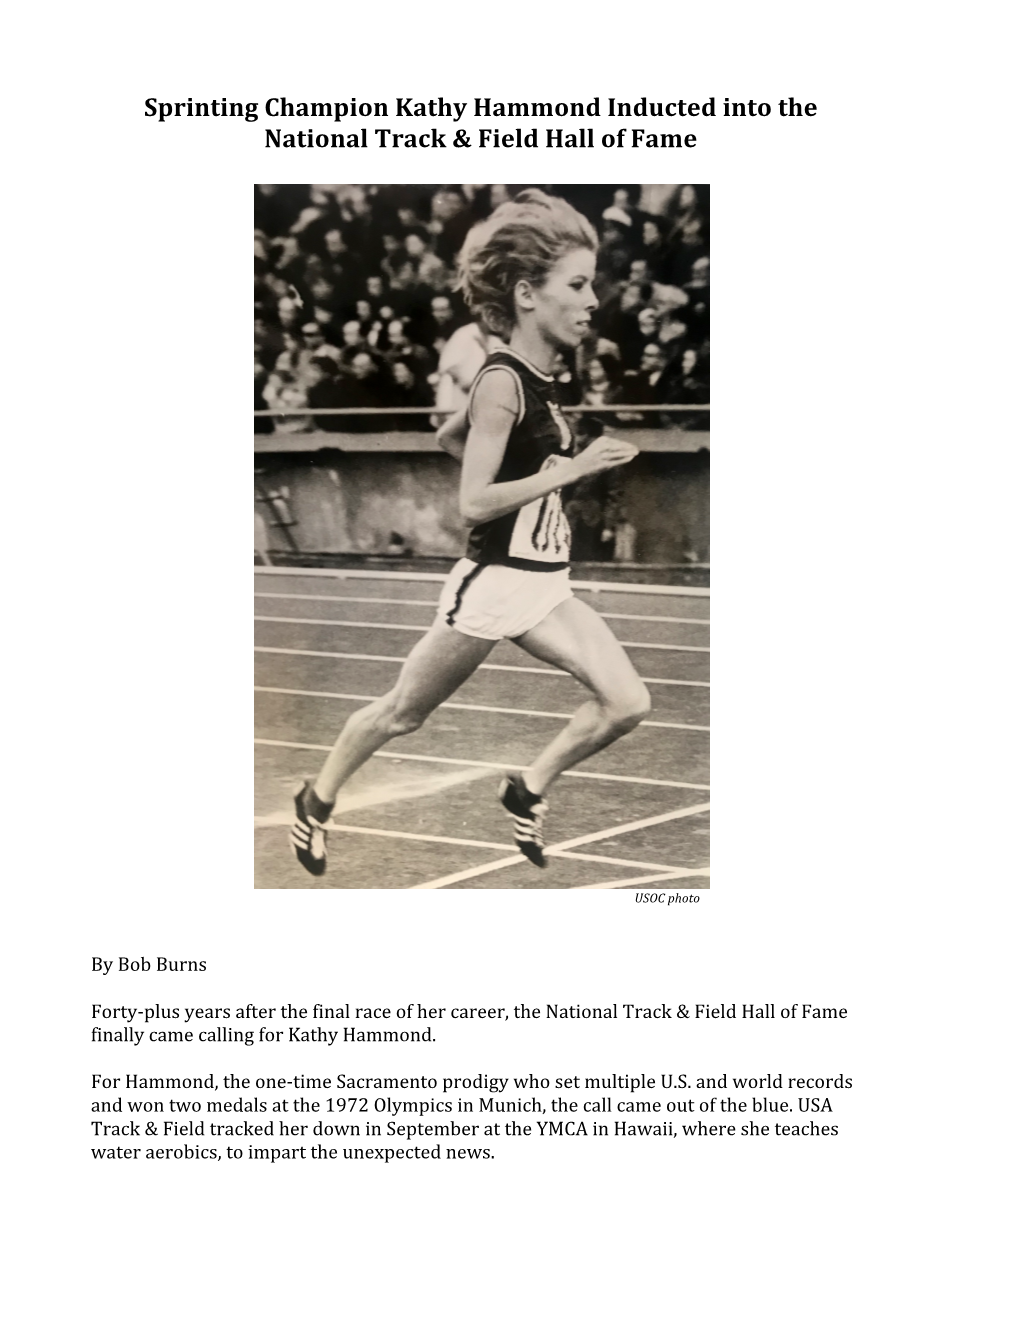 Sprinting Champion Kathy Hammond Inducted Into the National Track & Field Hall of Fame